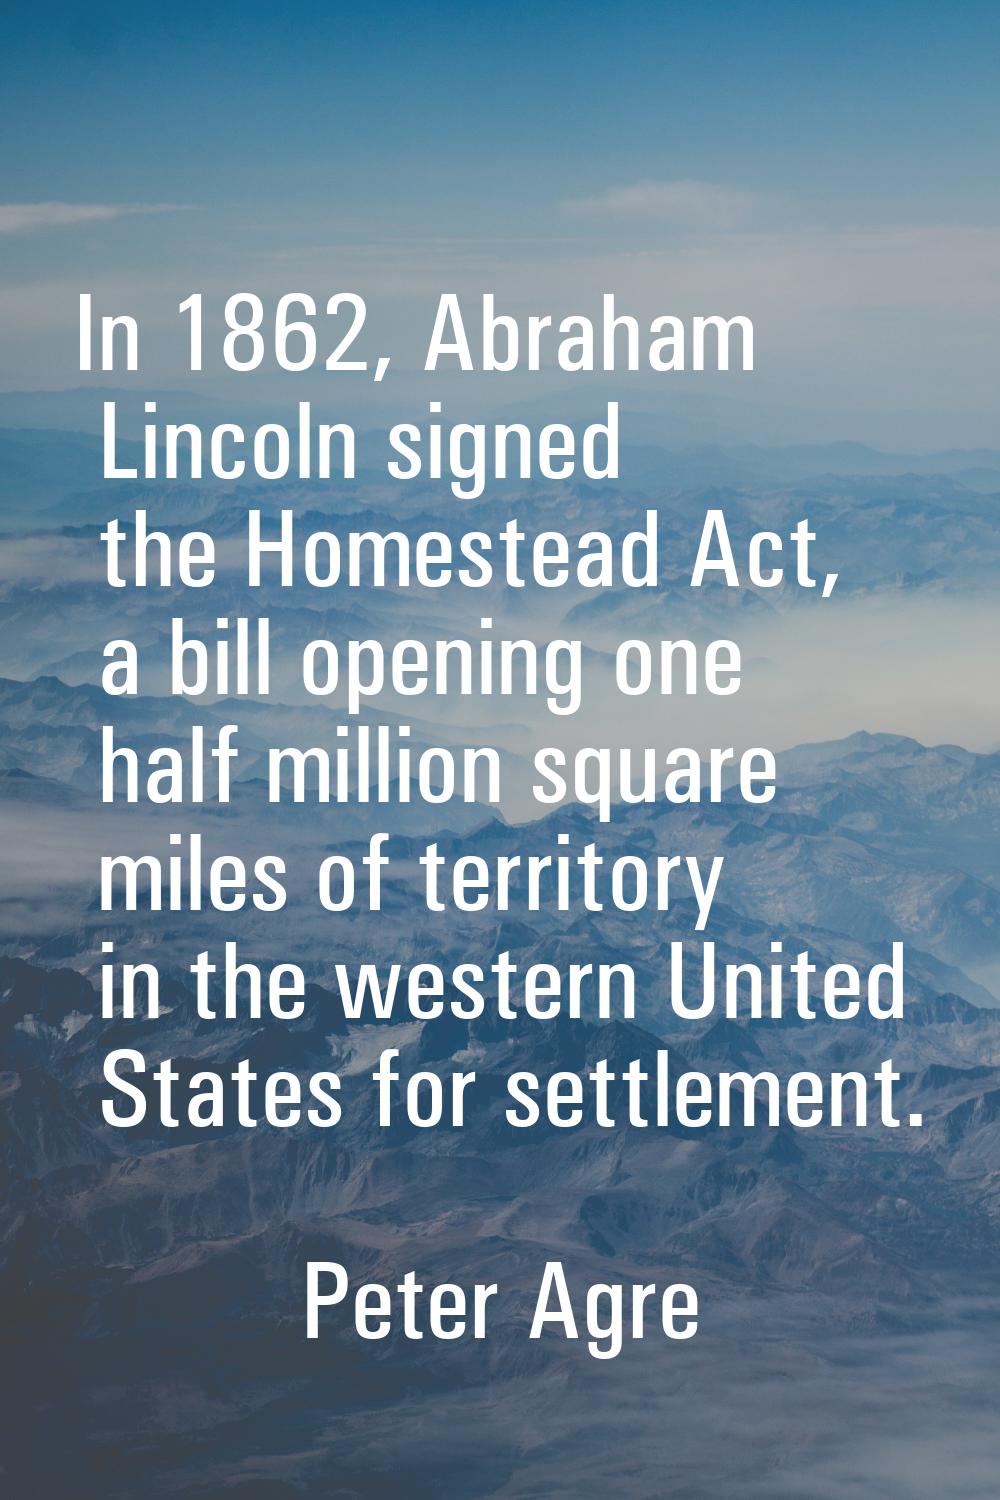 In 1862, Abraham Lincoln signed the Homestead Act, a bill opening one half million square miles of 